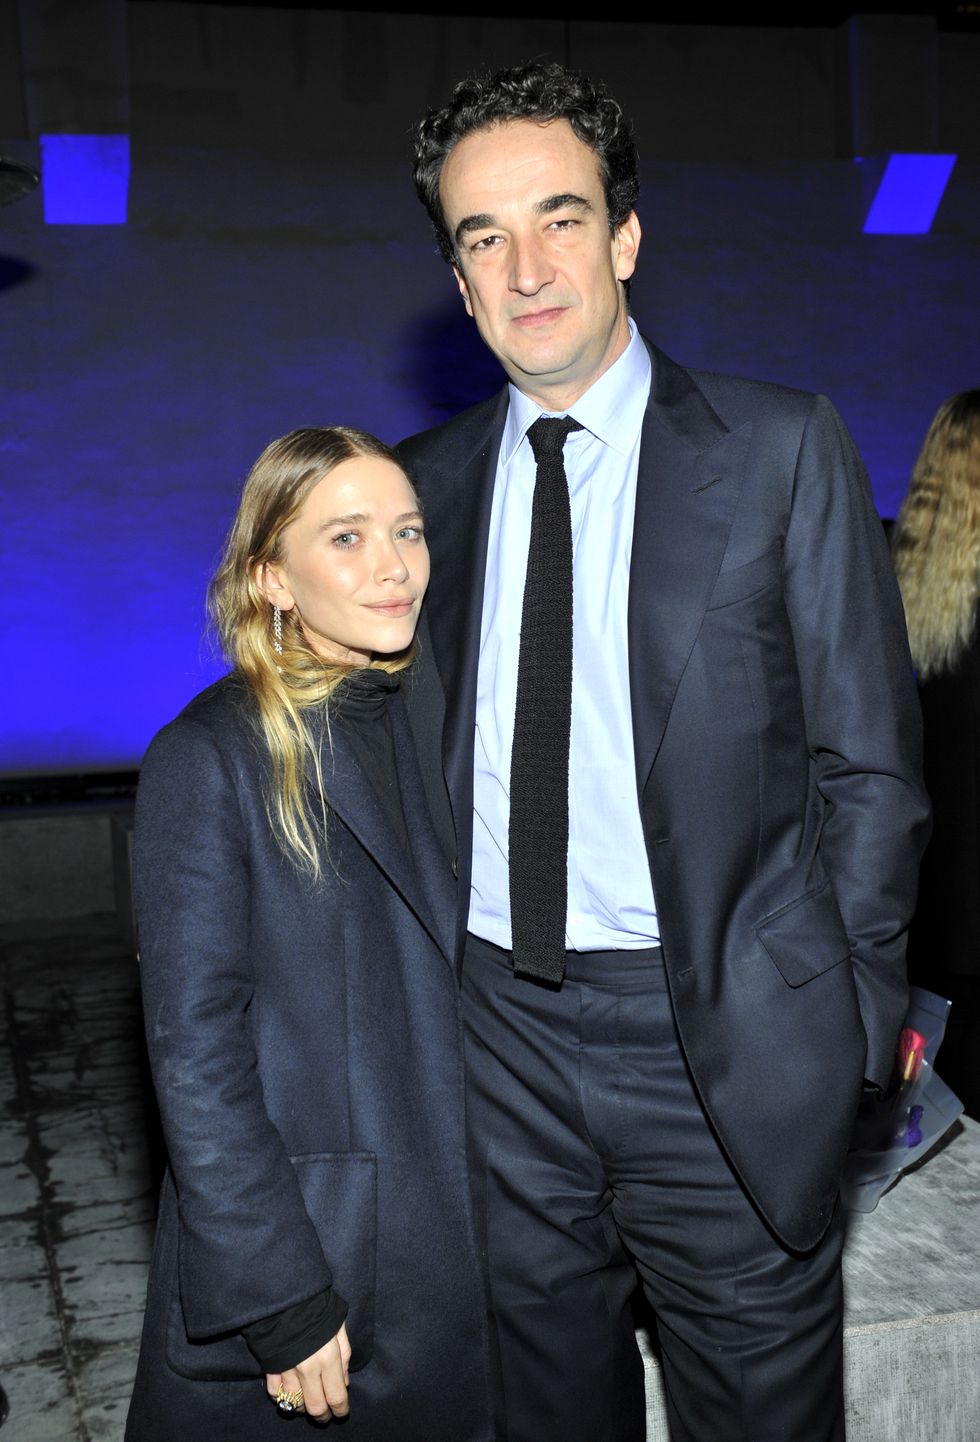 los angeles, ca   december 05  actress mary kate olsen l and olivier sarkozy attend the launch of just one eyes ulysses tier 1 the ultimate disaster relief kit on december 5, 2014 in los angeles, california  photo by donato sardellagetty images for just one eye